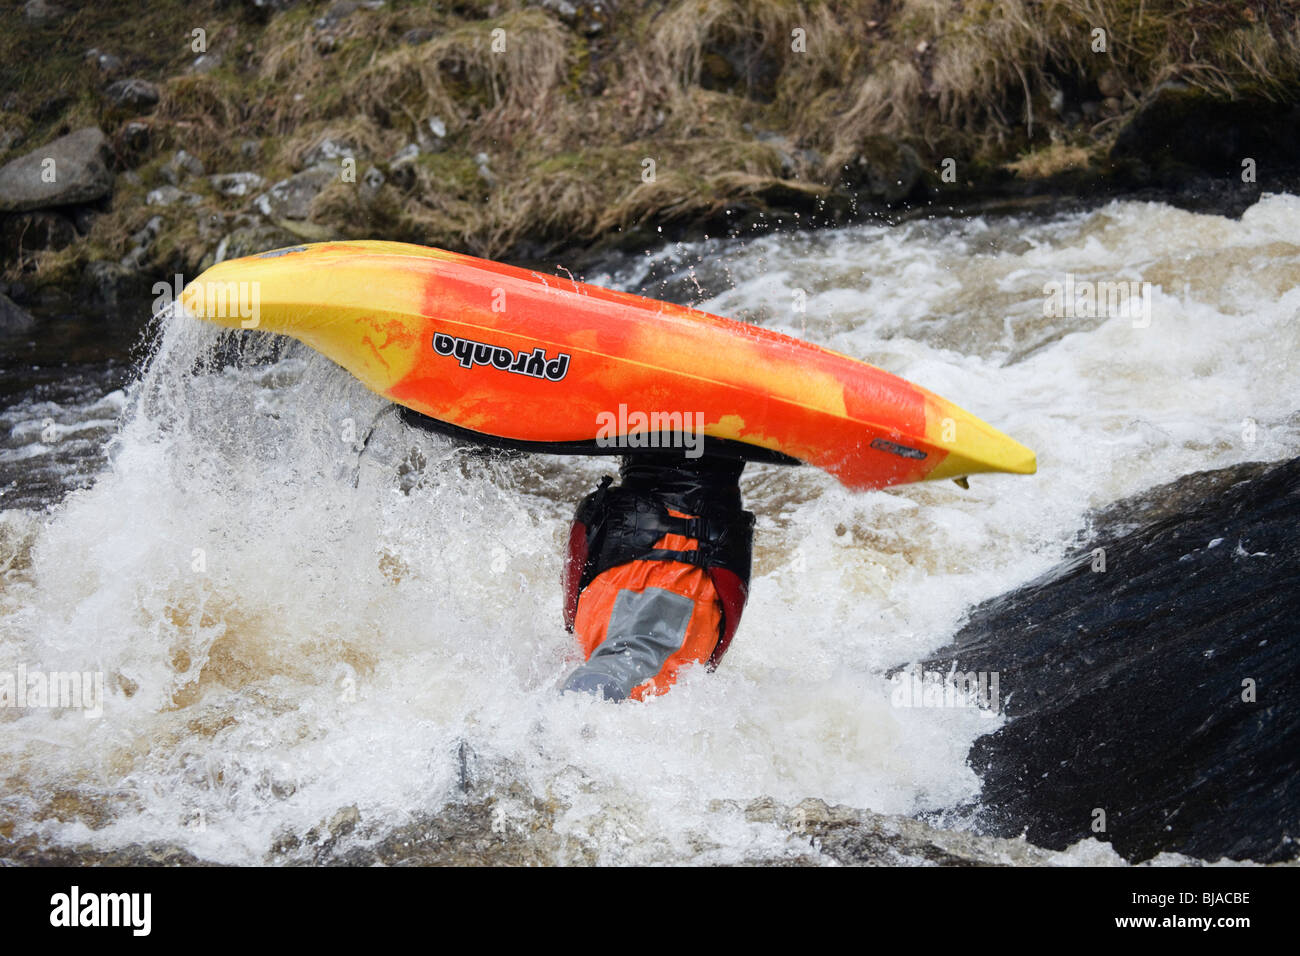 National Whitewater Centre North Wales UK Kayaker kayaking in Pyranah freestyle play kayak in white water on Tryweryn River Stock Photo